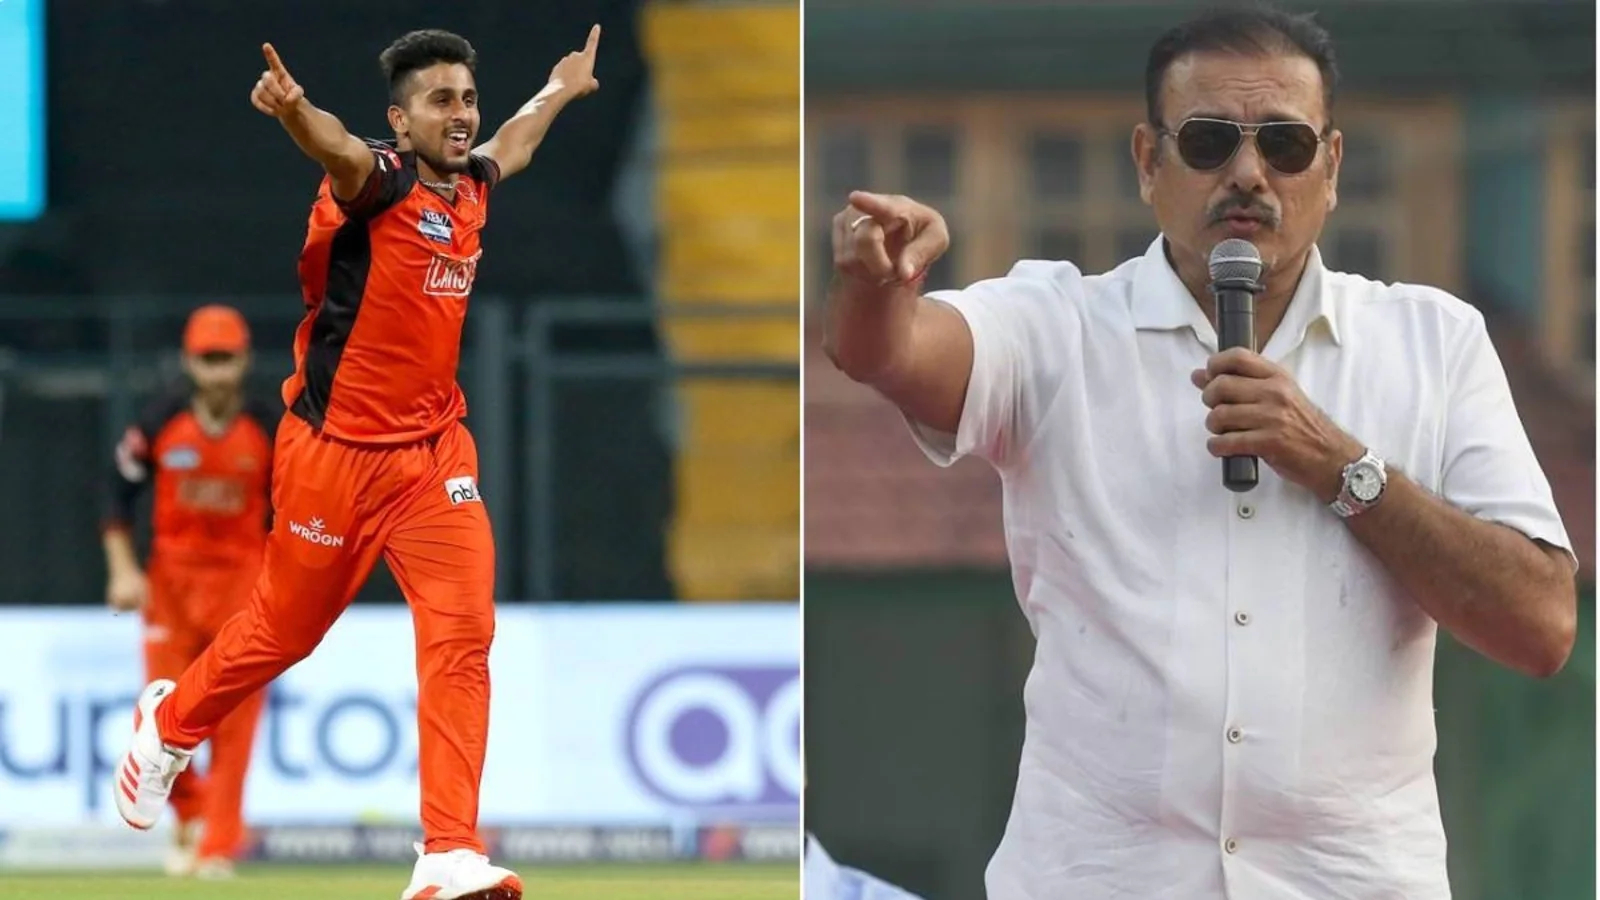 ‘157 kph doesn’t matter in T20s. If you don’t get it right, you’ll fetch big time’: Shastri issues huge warning to Umran